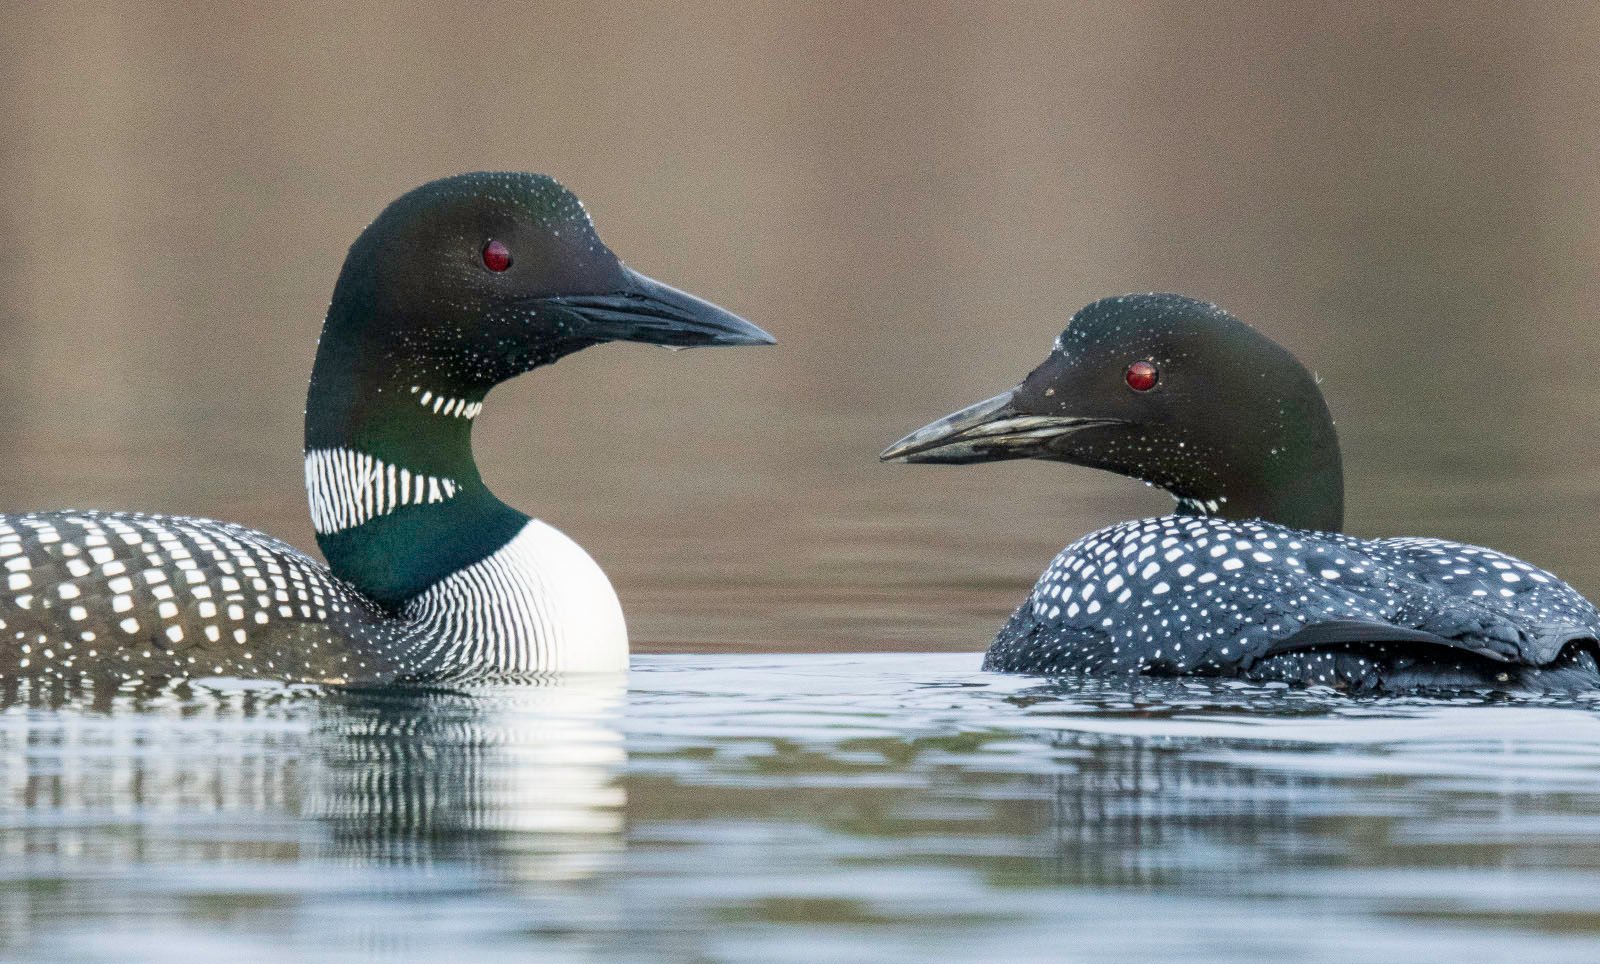 Two common loons, with their black-and-white plumage and distinctive red eyes, float close together on the calm water. Their sleek black heads turned slightly towards each other.